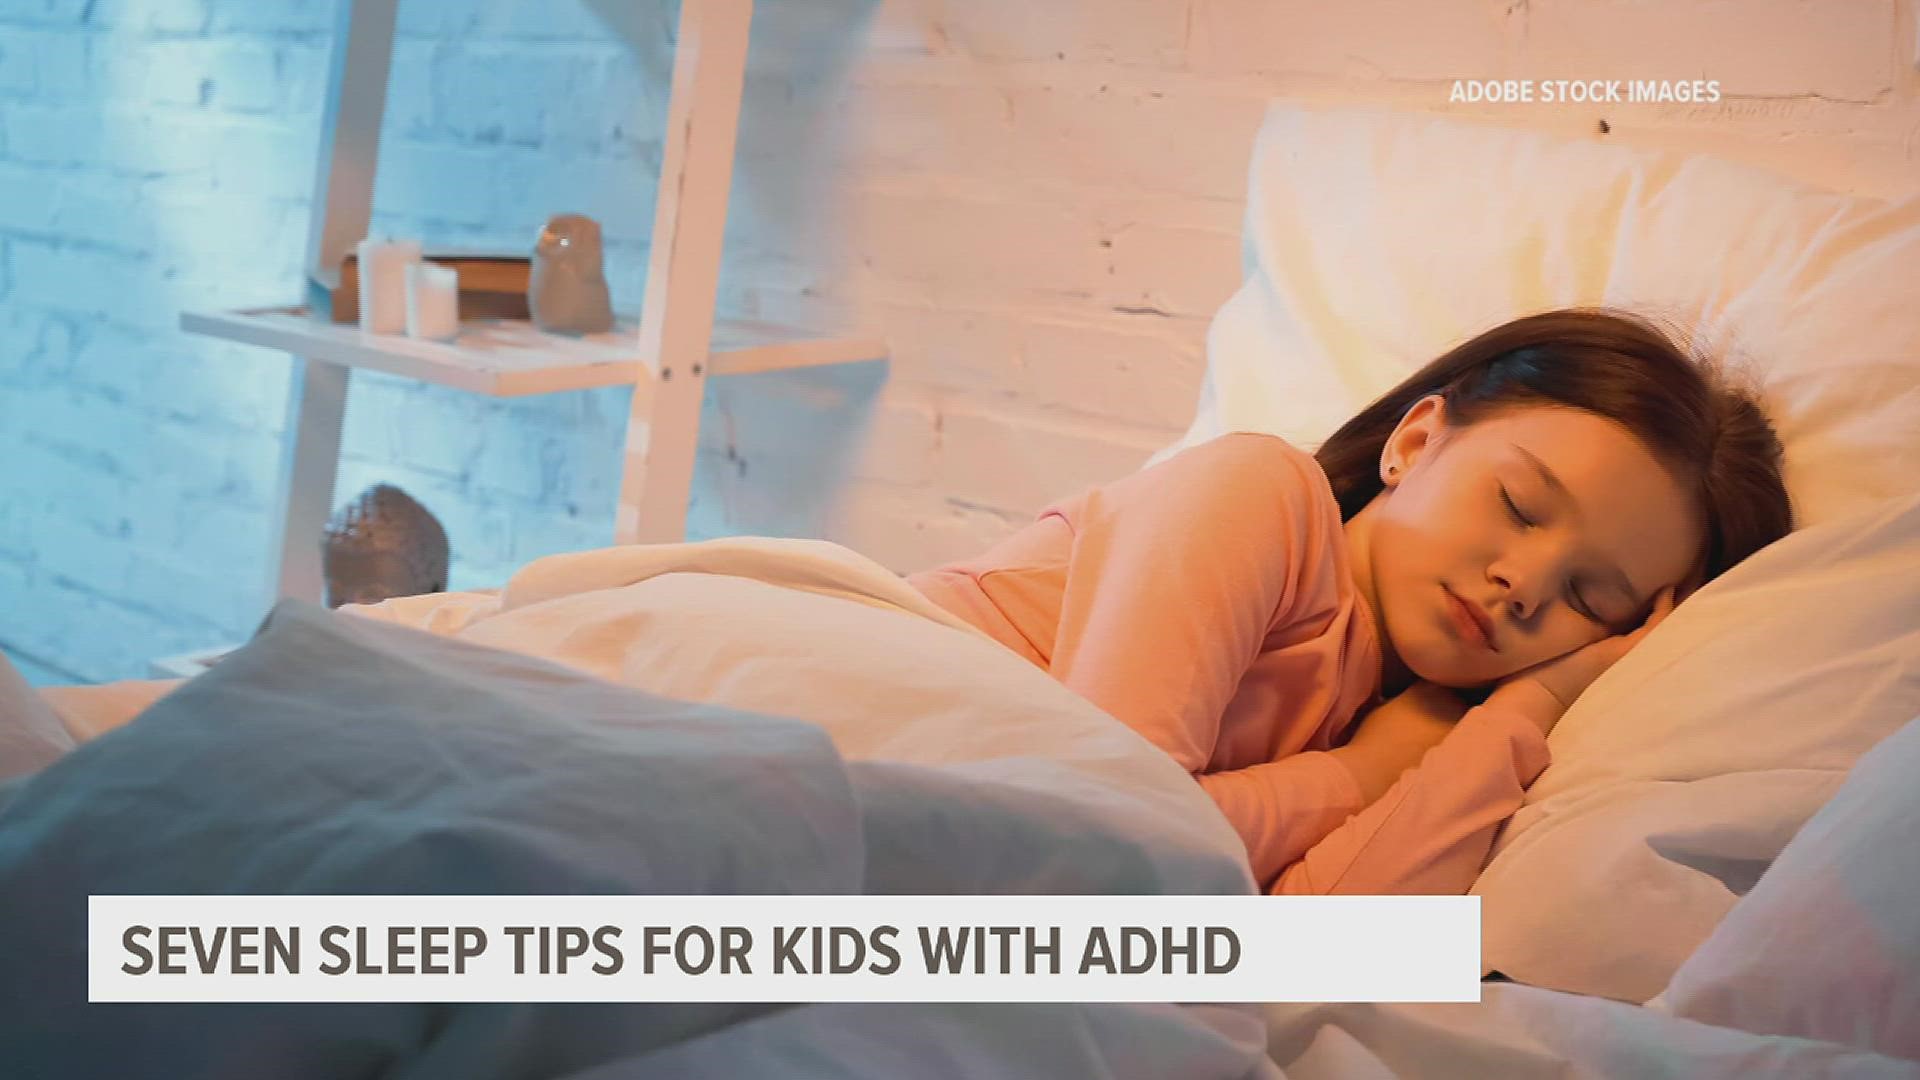 According to the American Academy of Sleep Medicine, kids with ADHD who don't get enough sleep can experience serious difficulties in school.